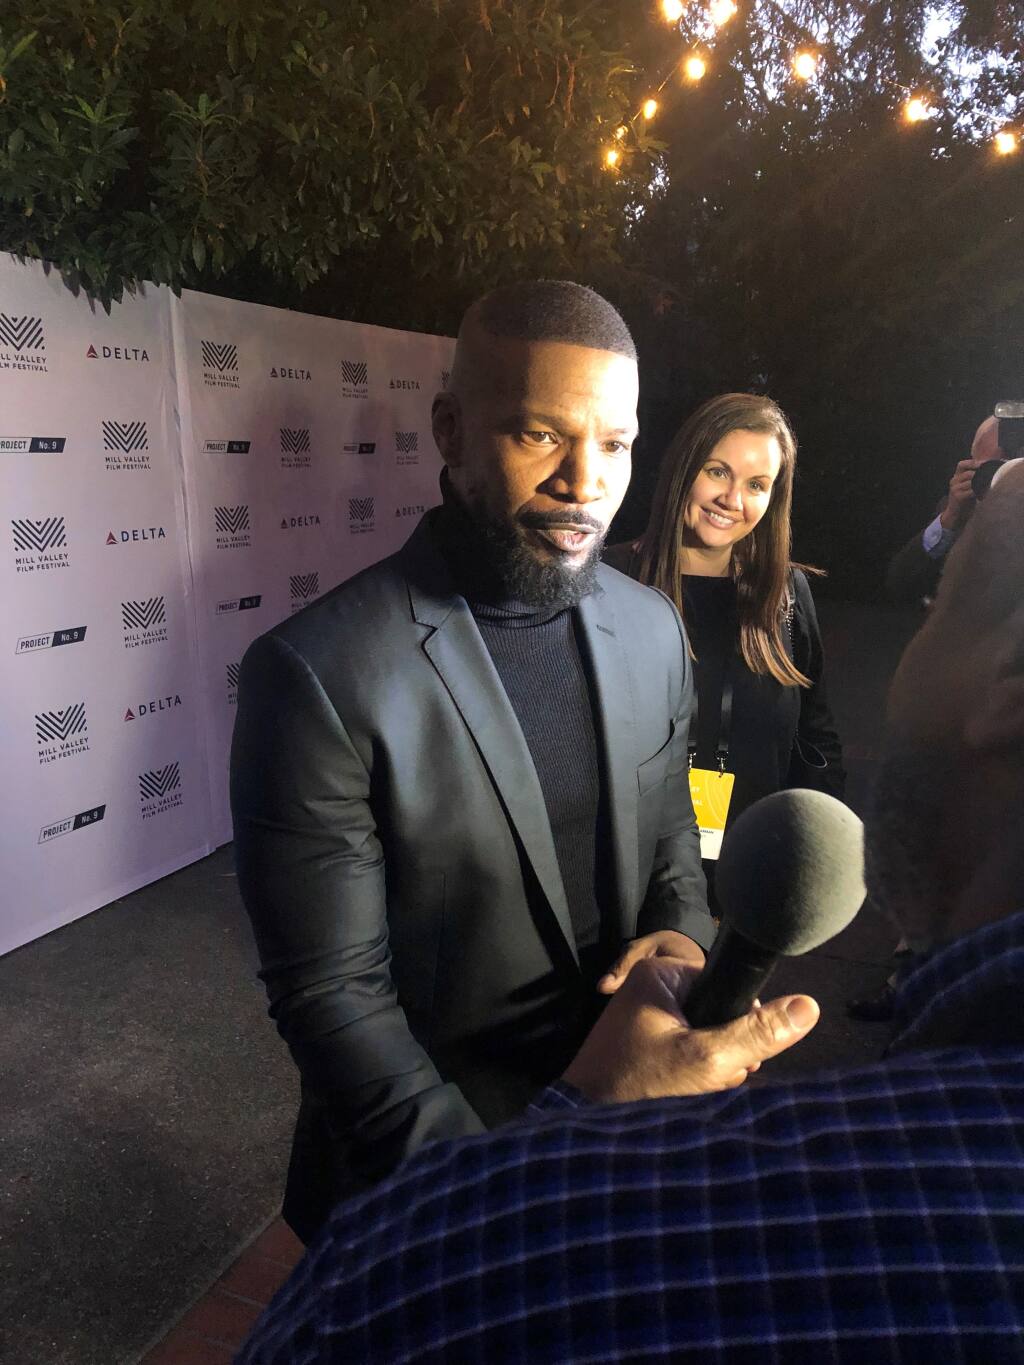 Jamie Foxx at the Mill Valley Film Festival, appearing with his film “Just Mercy,” in 2019. (Photo by David Templeton)